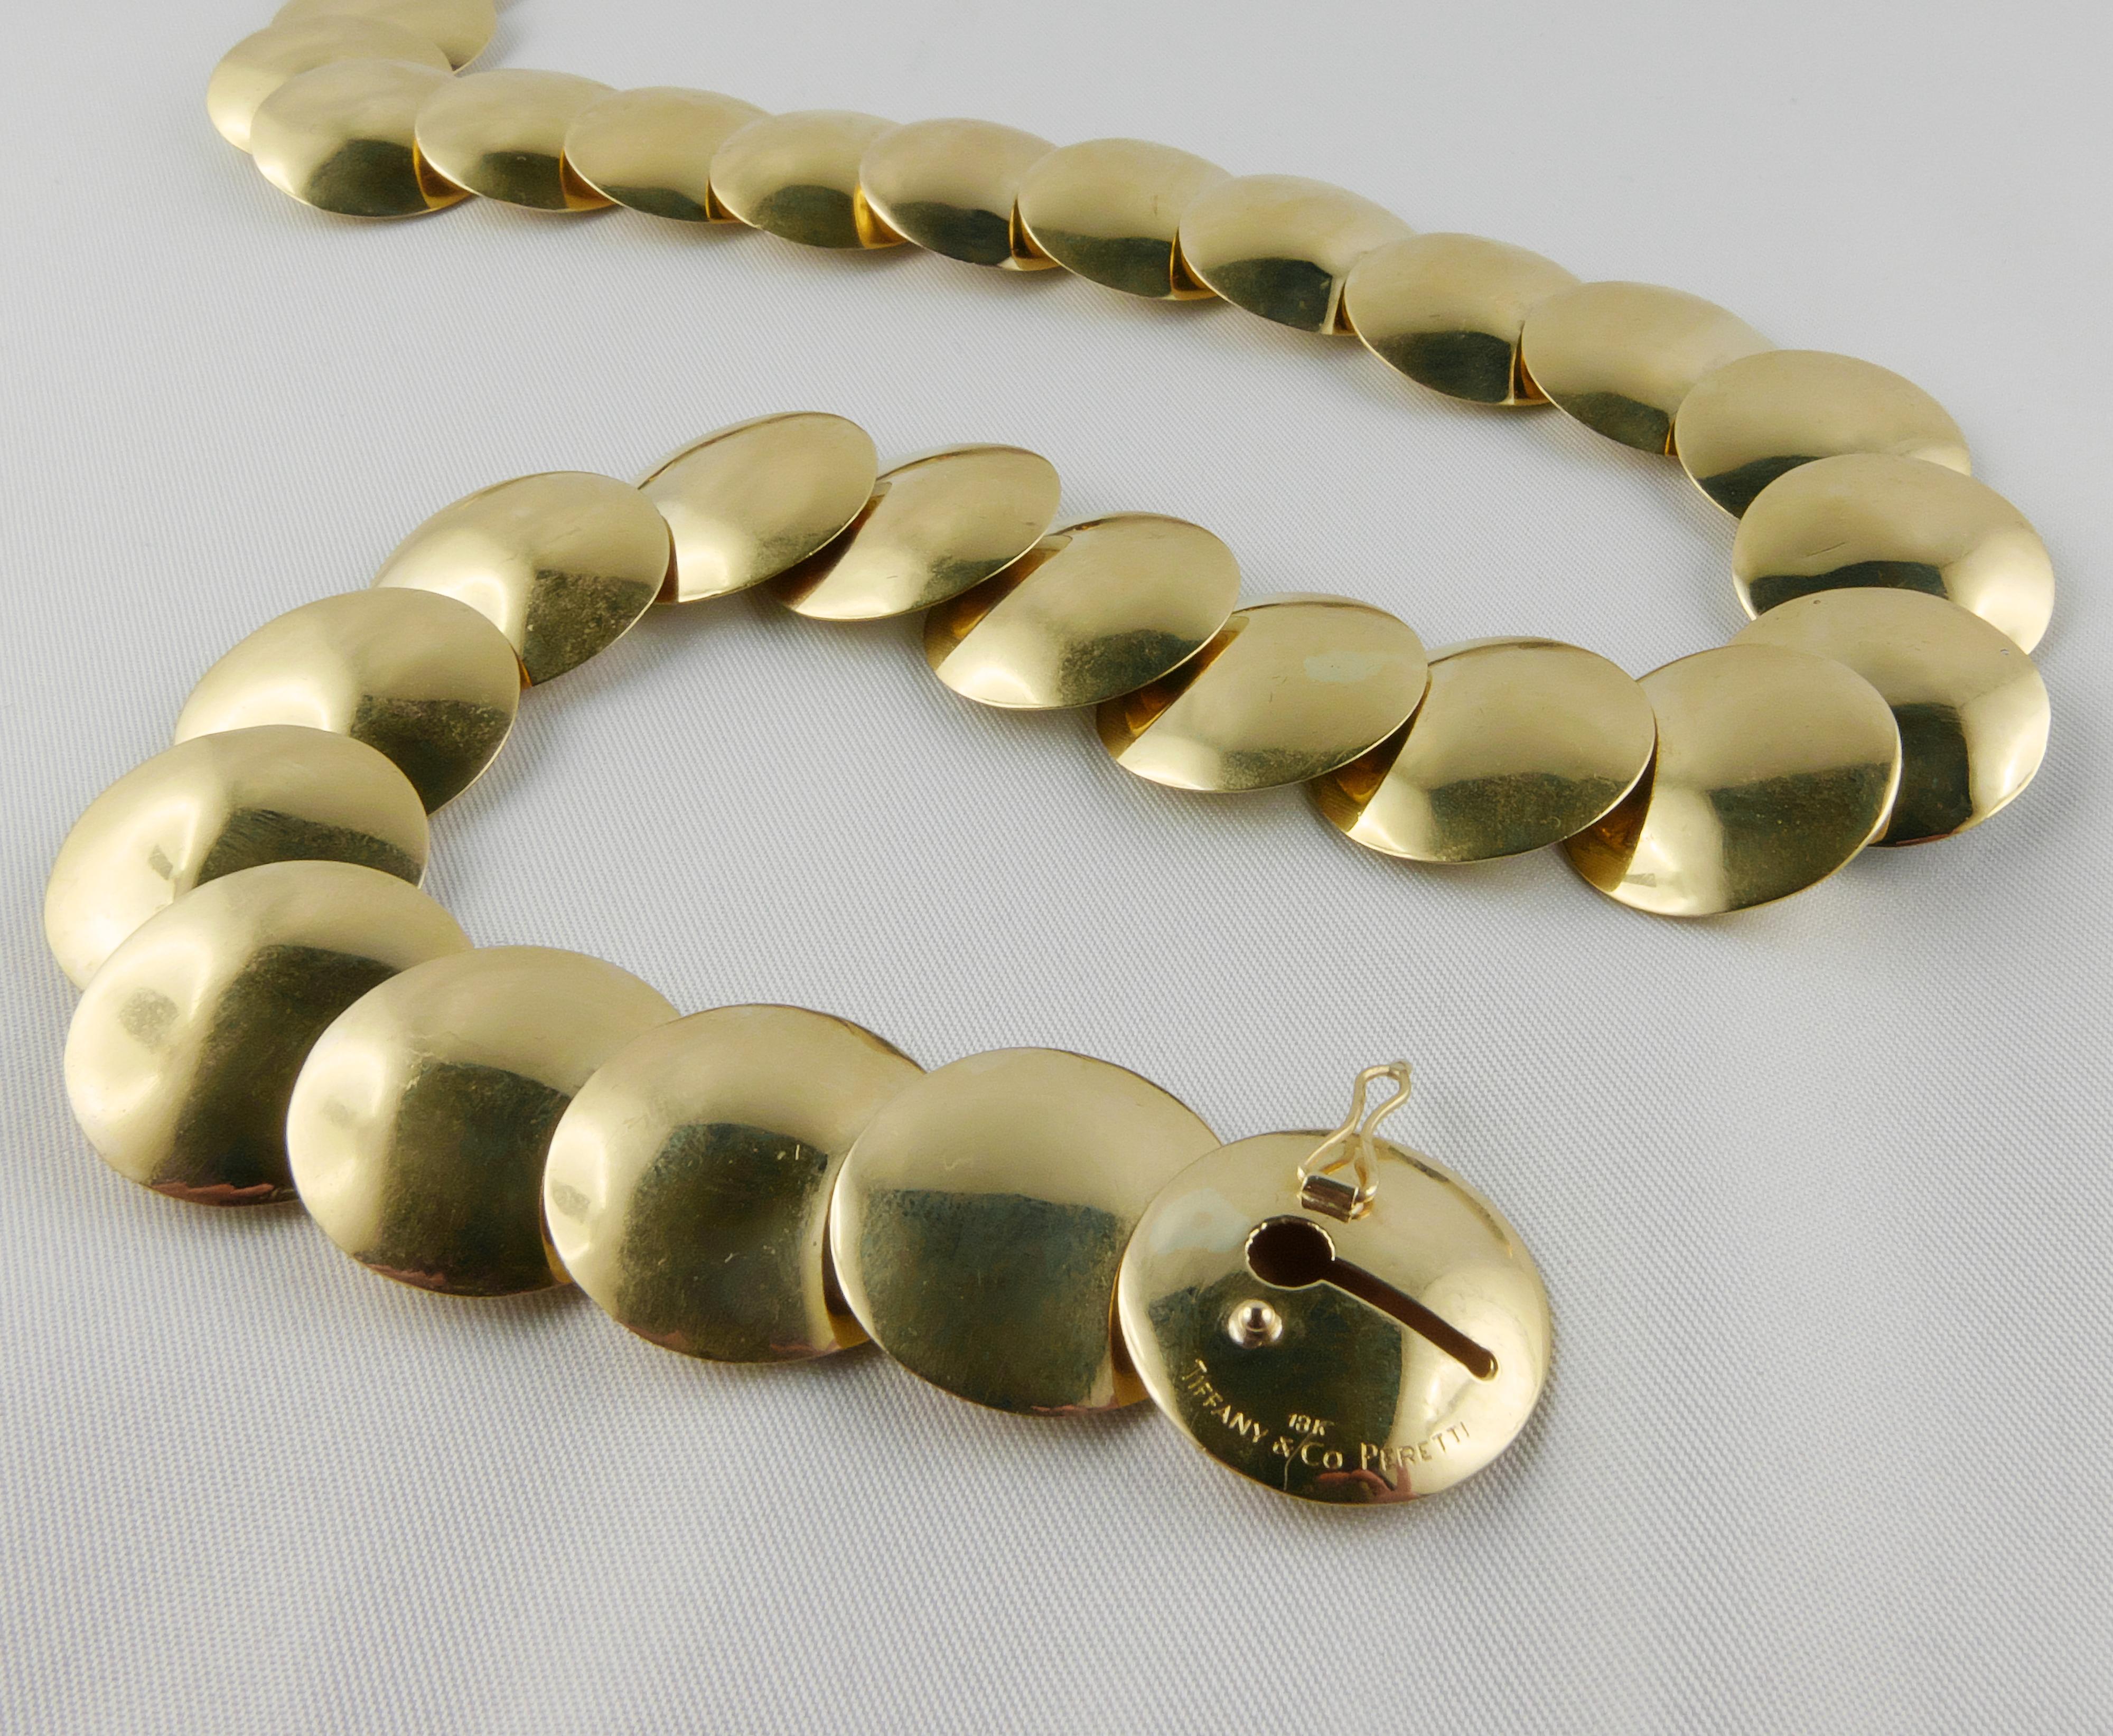 1980s luminous flexible Necklace signed Elsa Peretti TIFFANY & CO. Crafted in polished 18k  Yellow Gold, is made of 29 round bombé discs. 
Stylish and very chic, this Necklace is enlighted with a pavé of  round  cut sparkly Diamonds on one of the